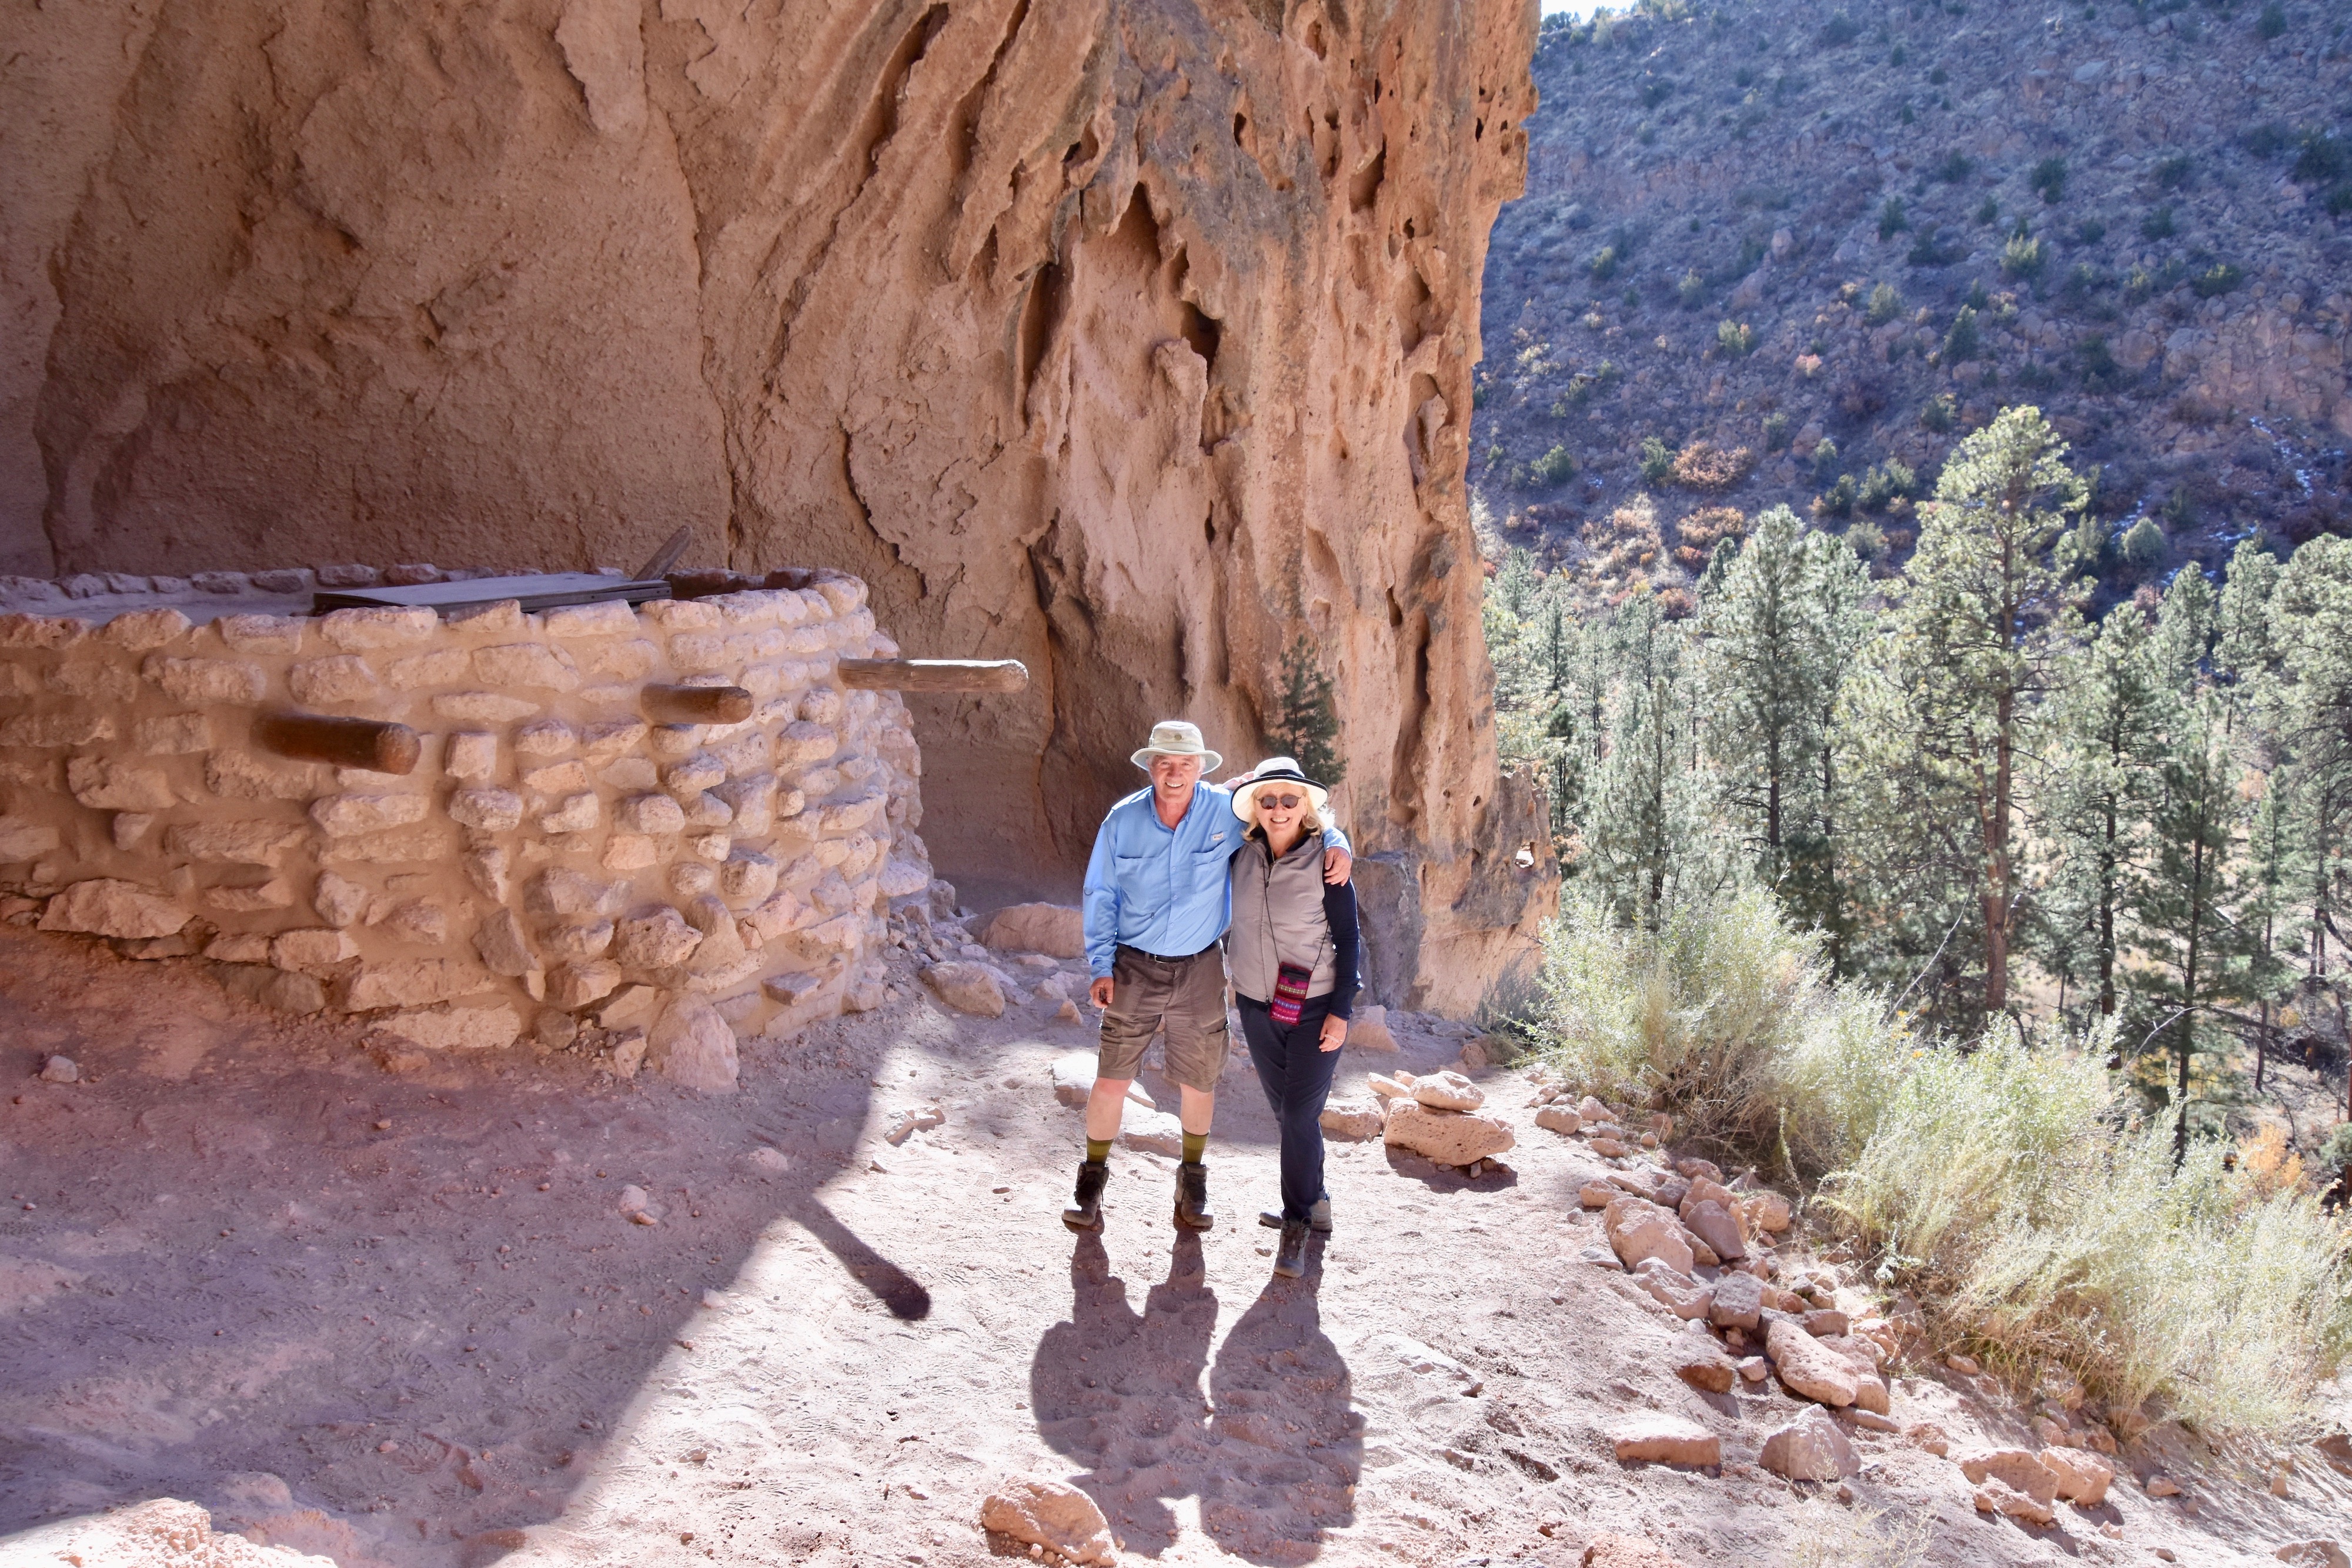 At Alcove House, Bandelier N.M.